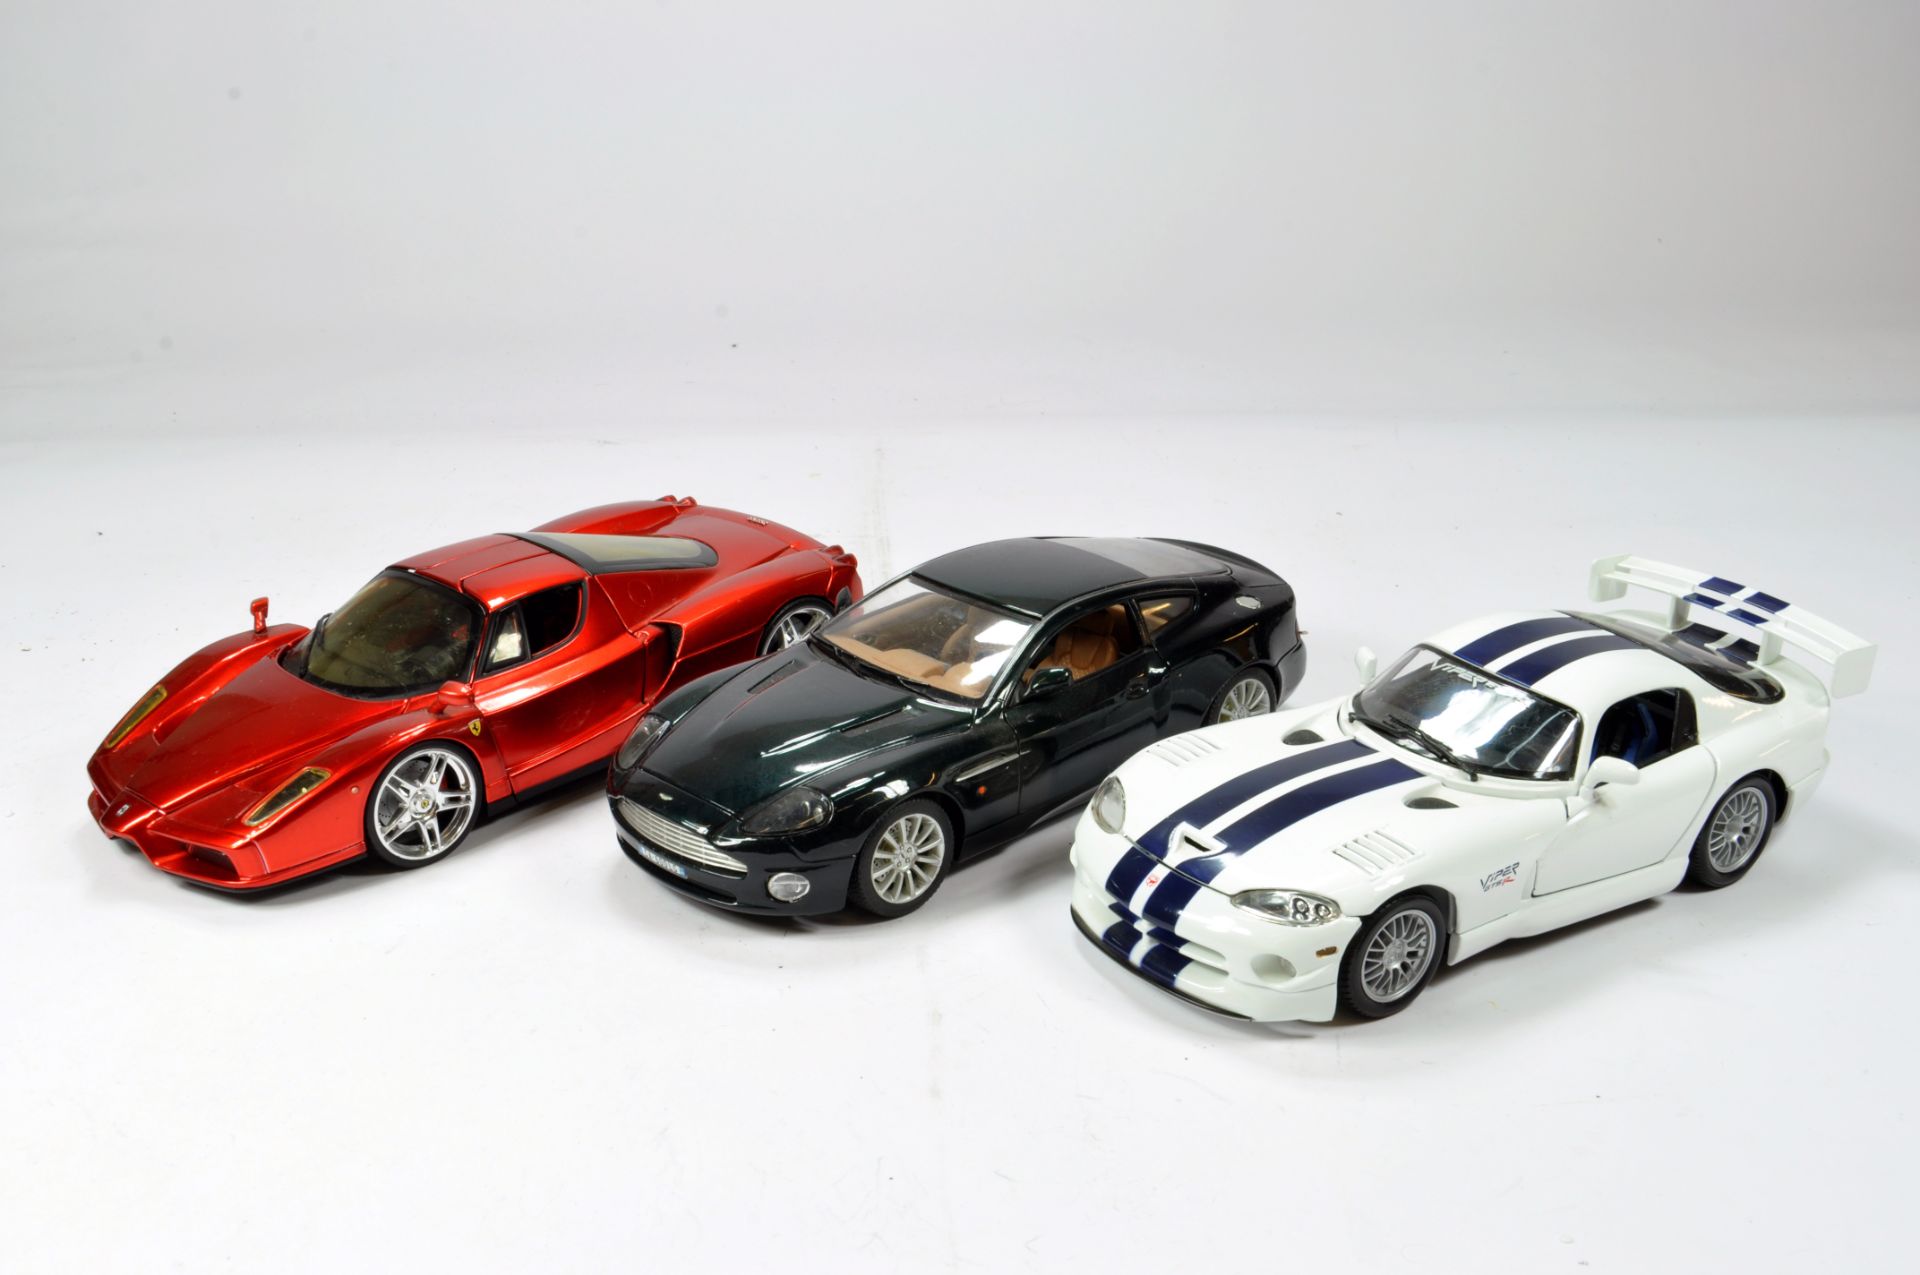 Diecast 1/18 car selection comprising various issues; Ferrari, Dodge and Aston Martin. Generally